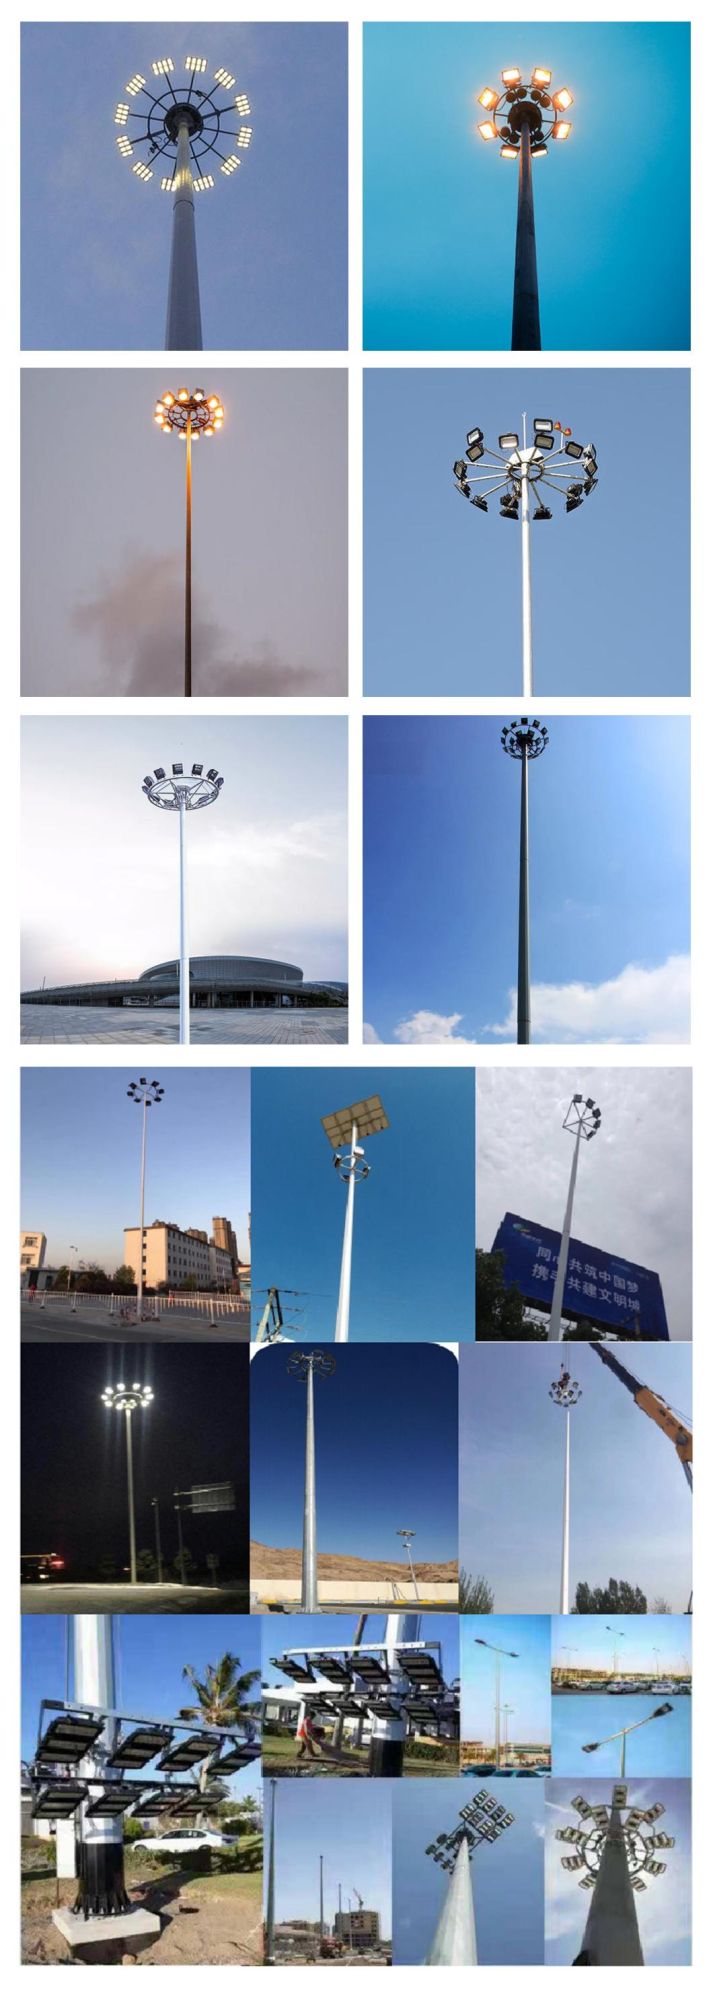 15m~30m High Mast Light Octagonal 12-Edge Pole for Stadium Airport Square Factory Customize with CAD Design for LED Flood Light Auto Lighting System